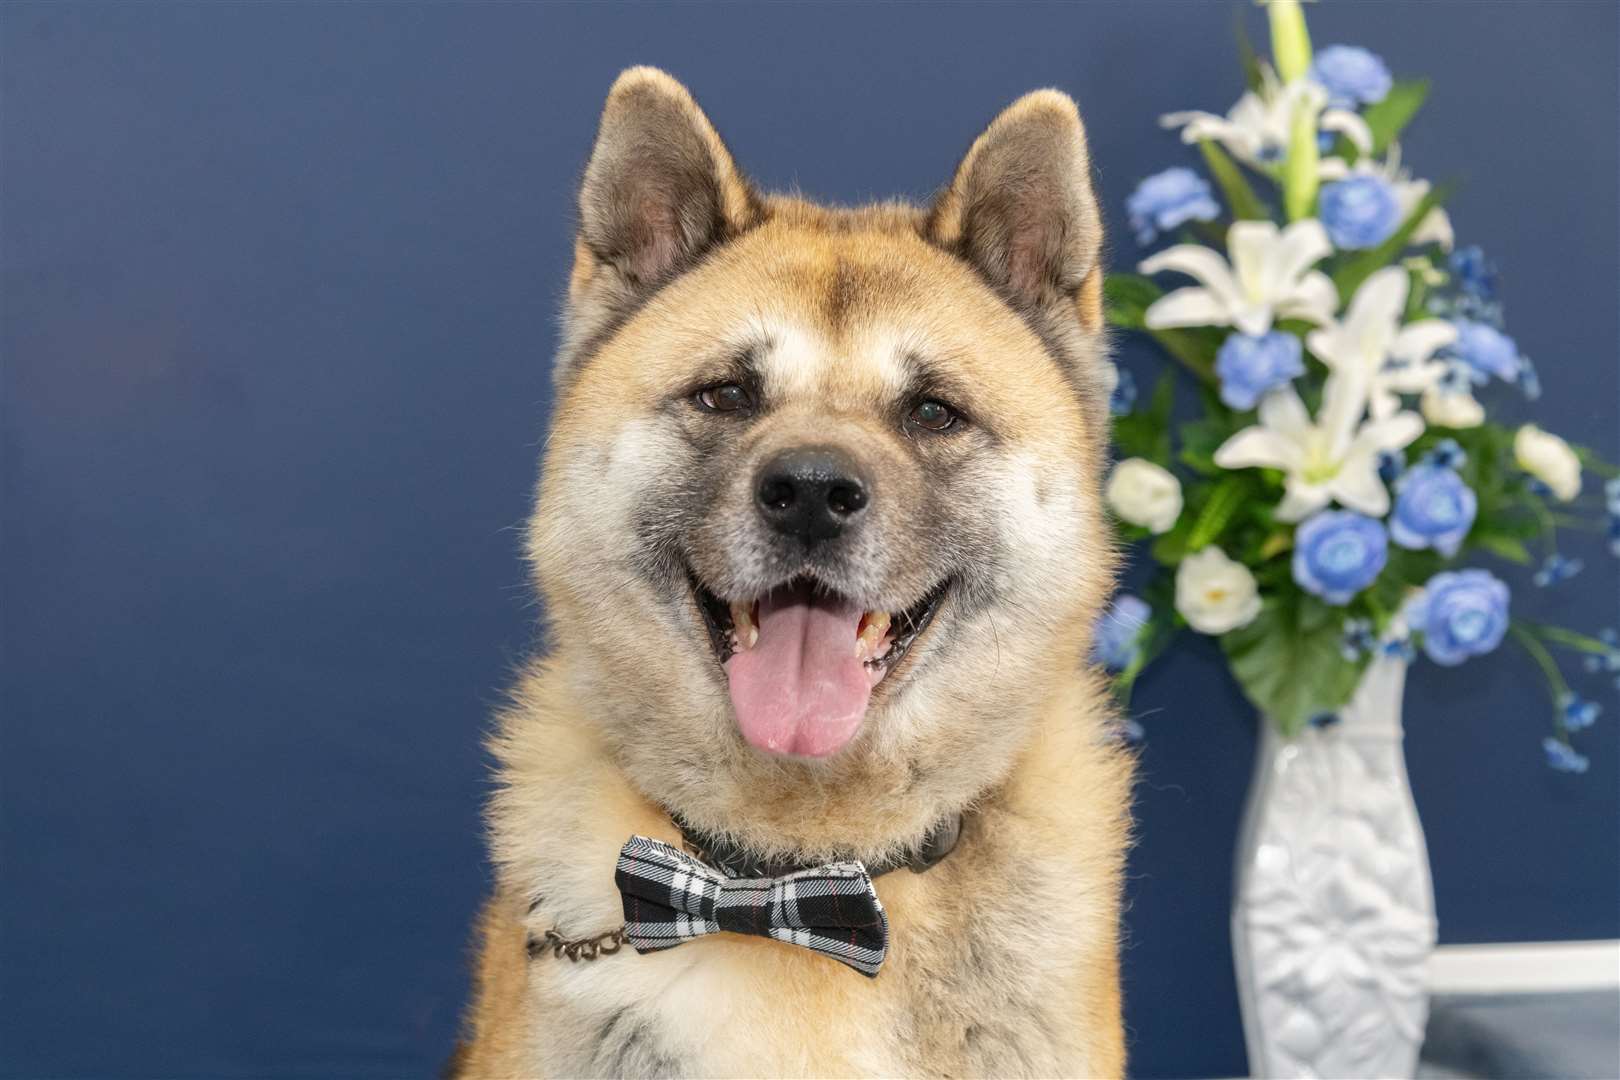 Bobo the American Akita has been recruited to help people with their anxiety and stress. Picture: Beth Taylor